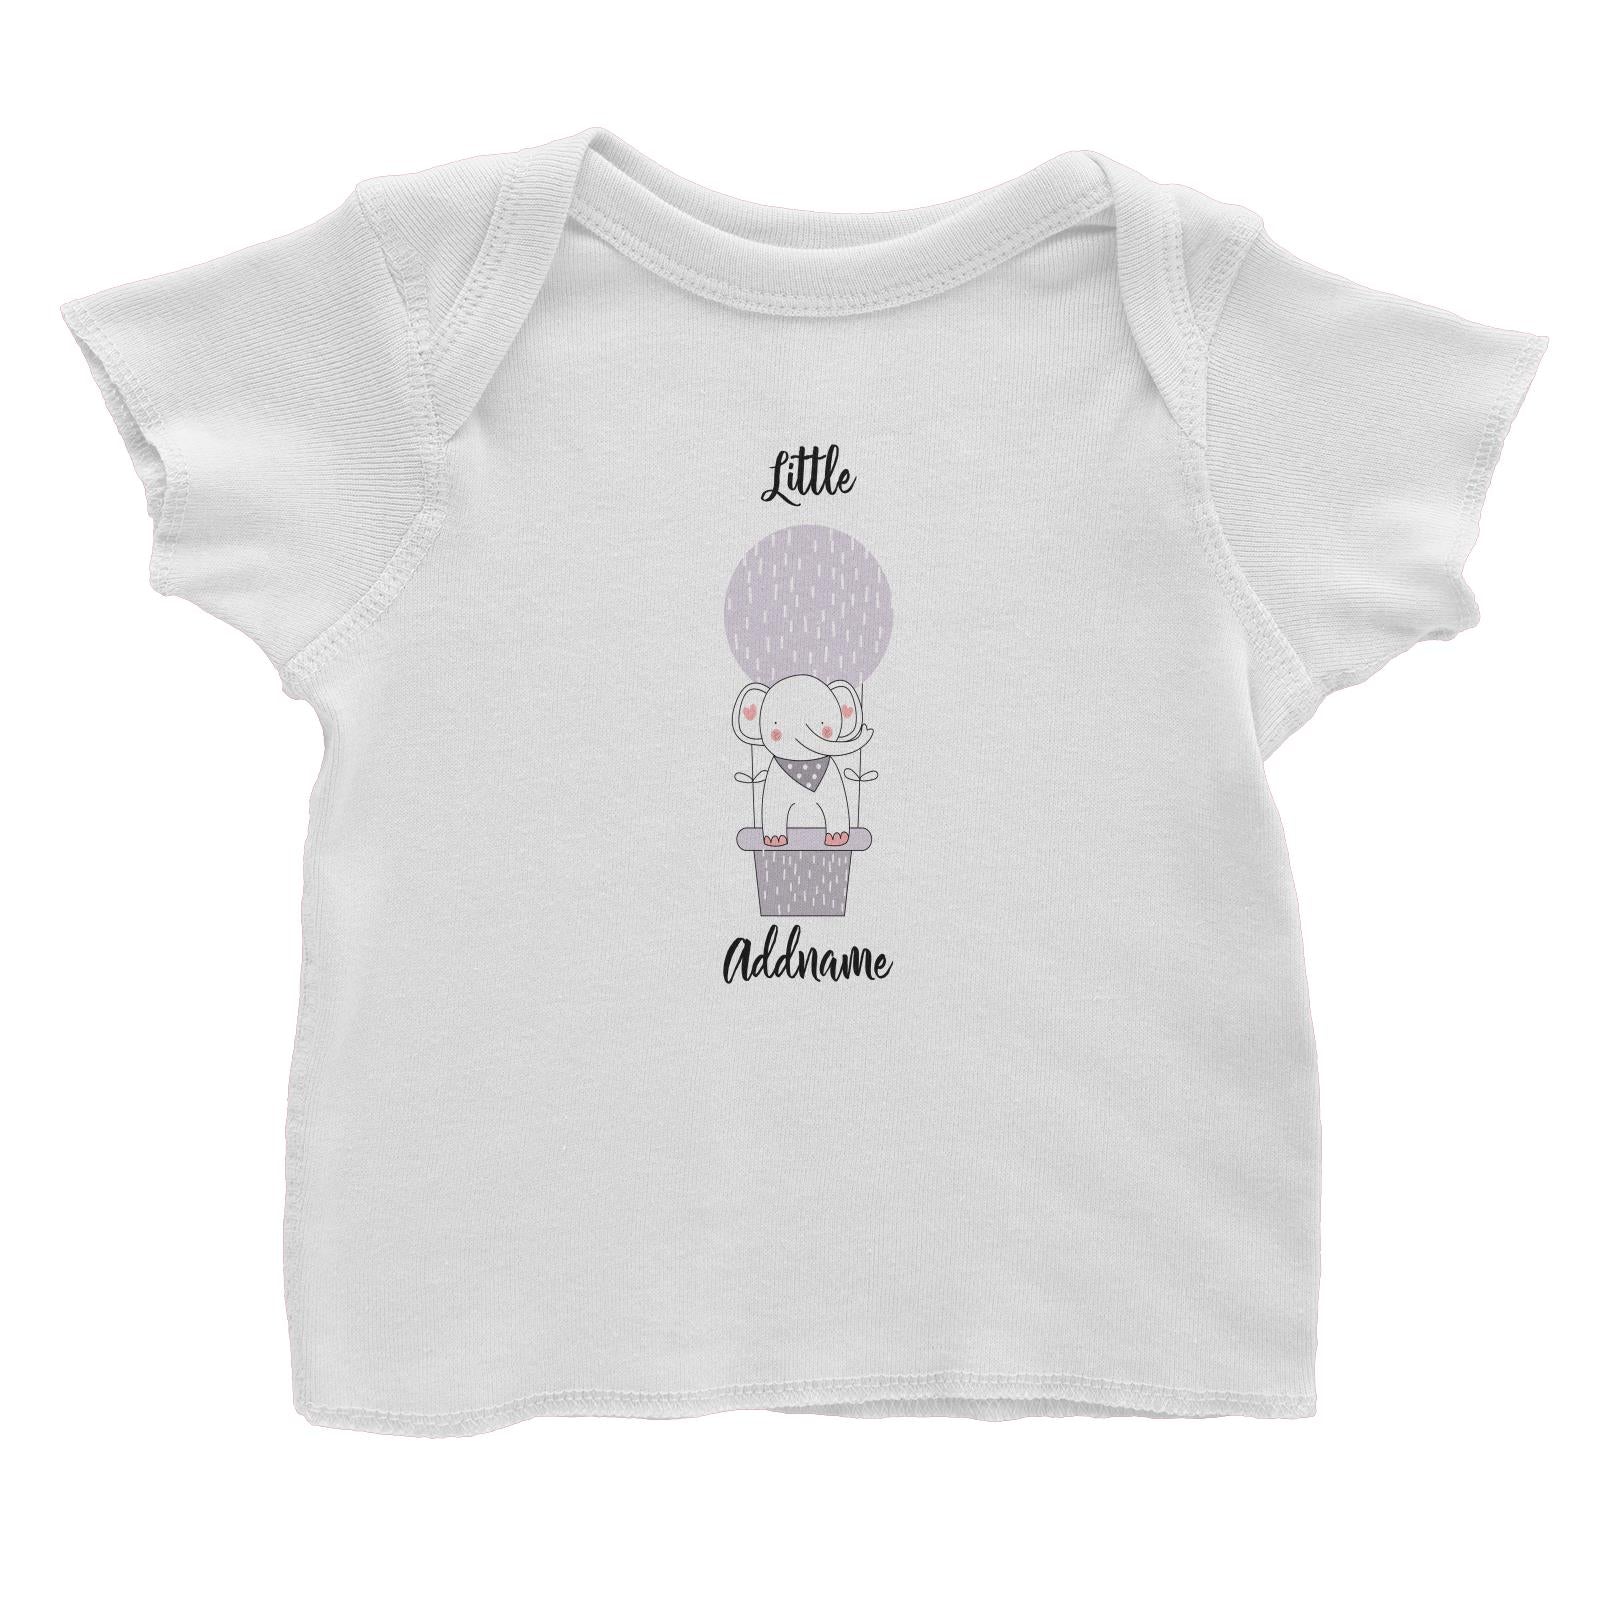 Cute Air Balloon with Elephant Addname Baby T-Shirt